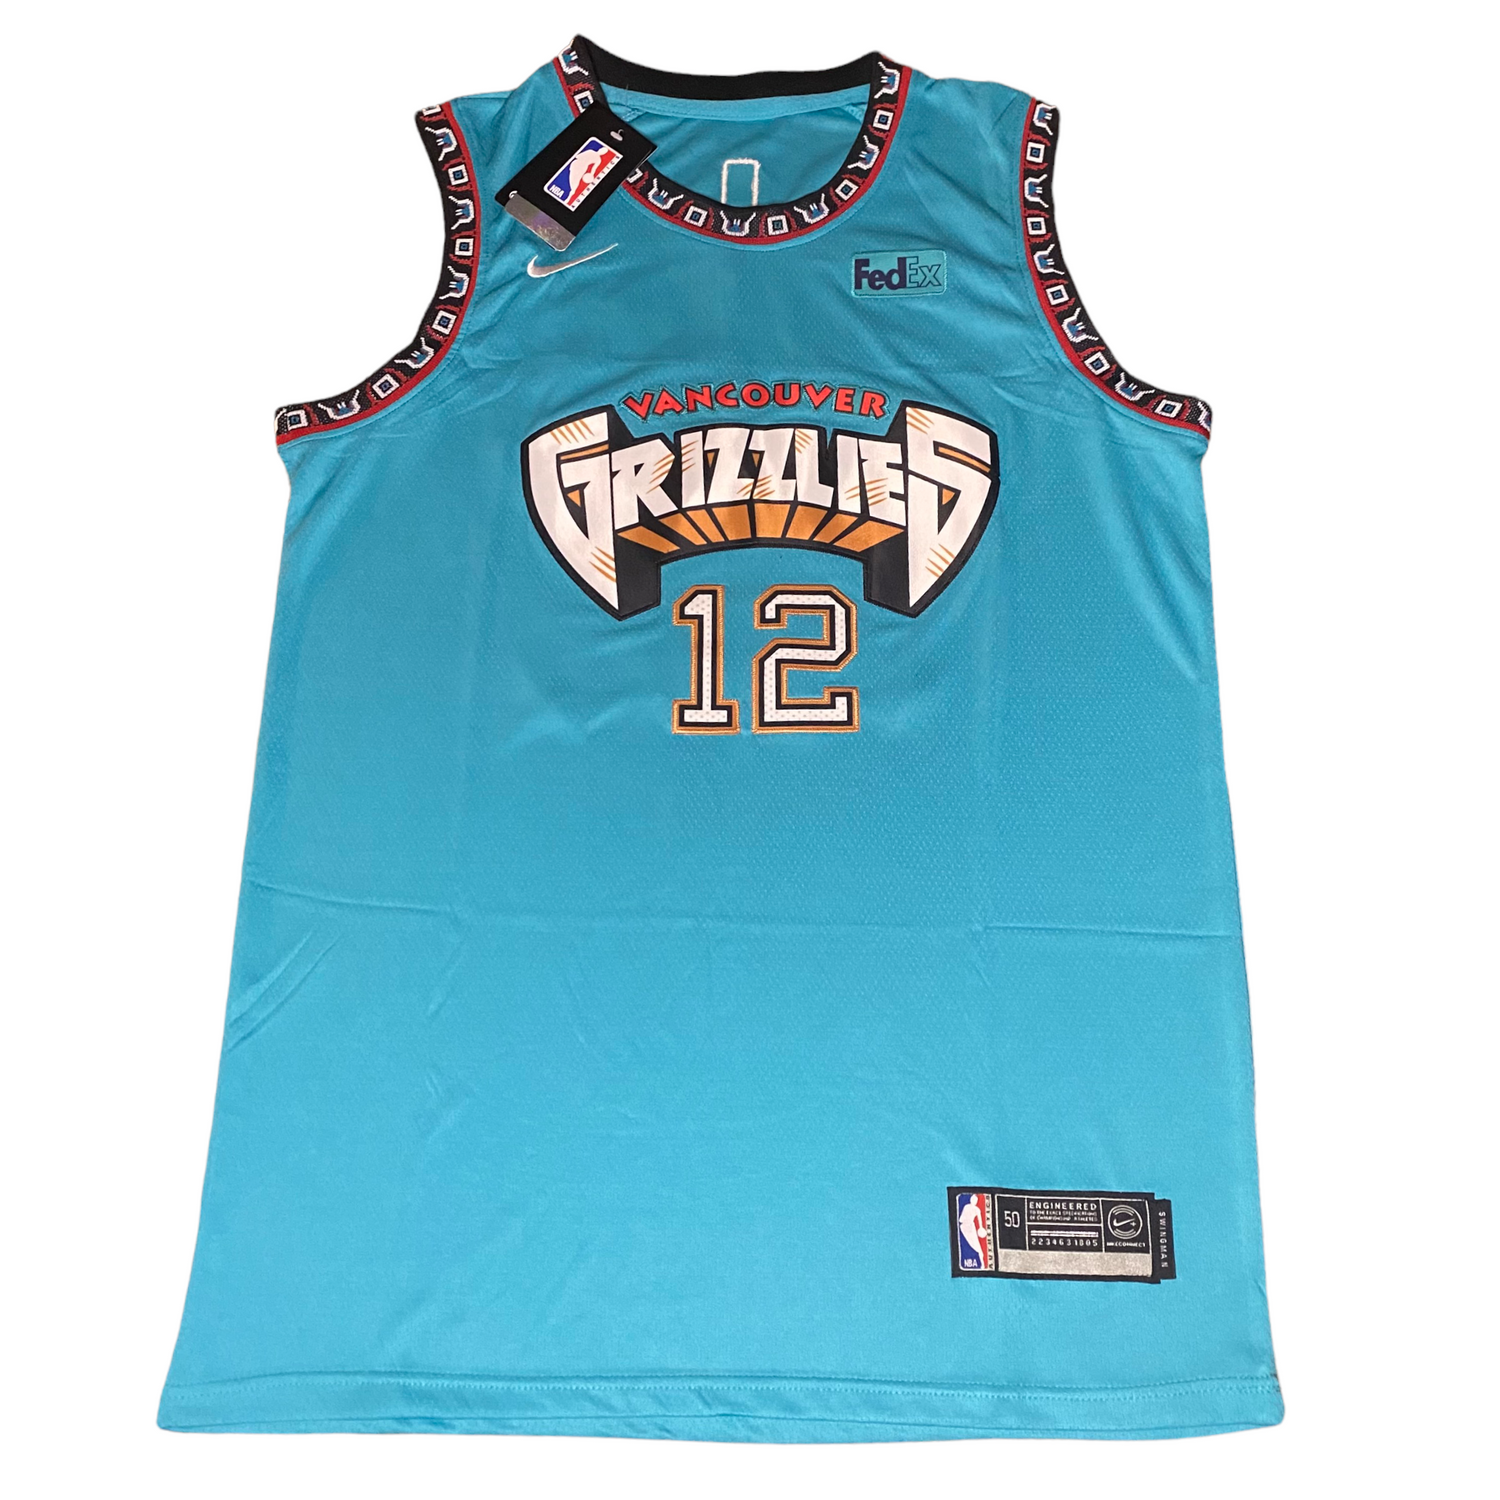 Vancouver Grizzlies Morant jersey just in time for Sat! : r/memphisgrizzlies